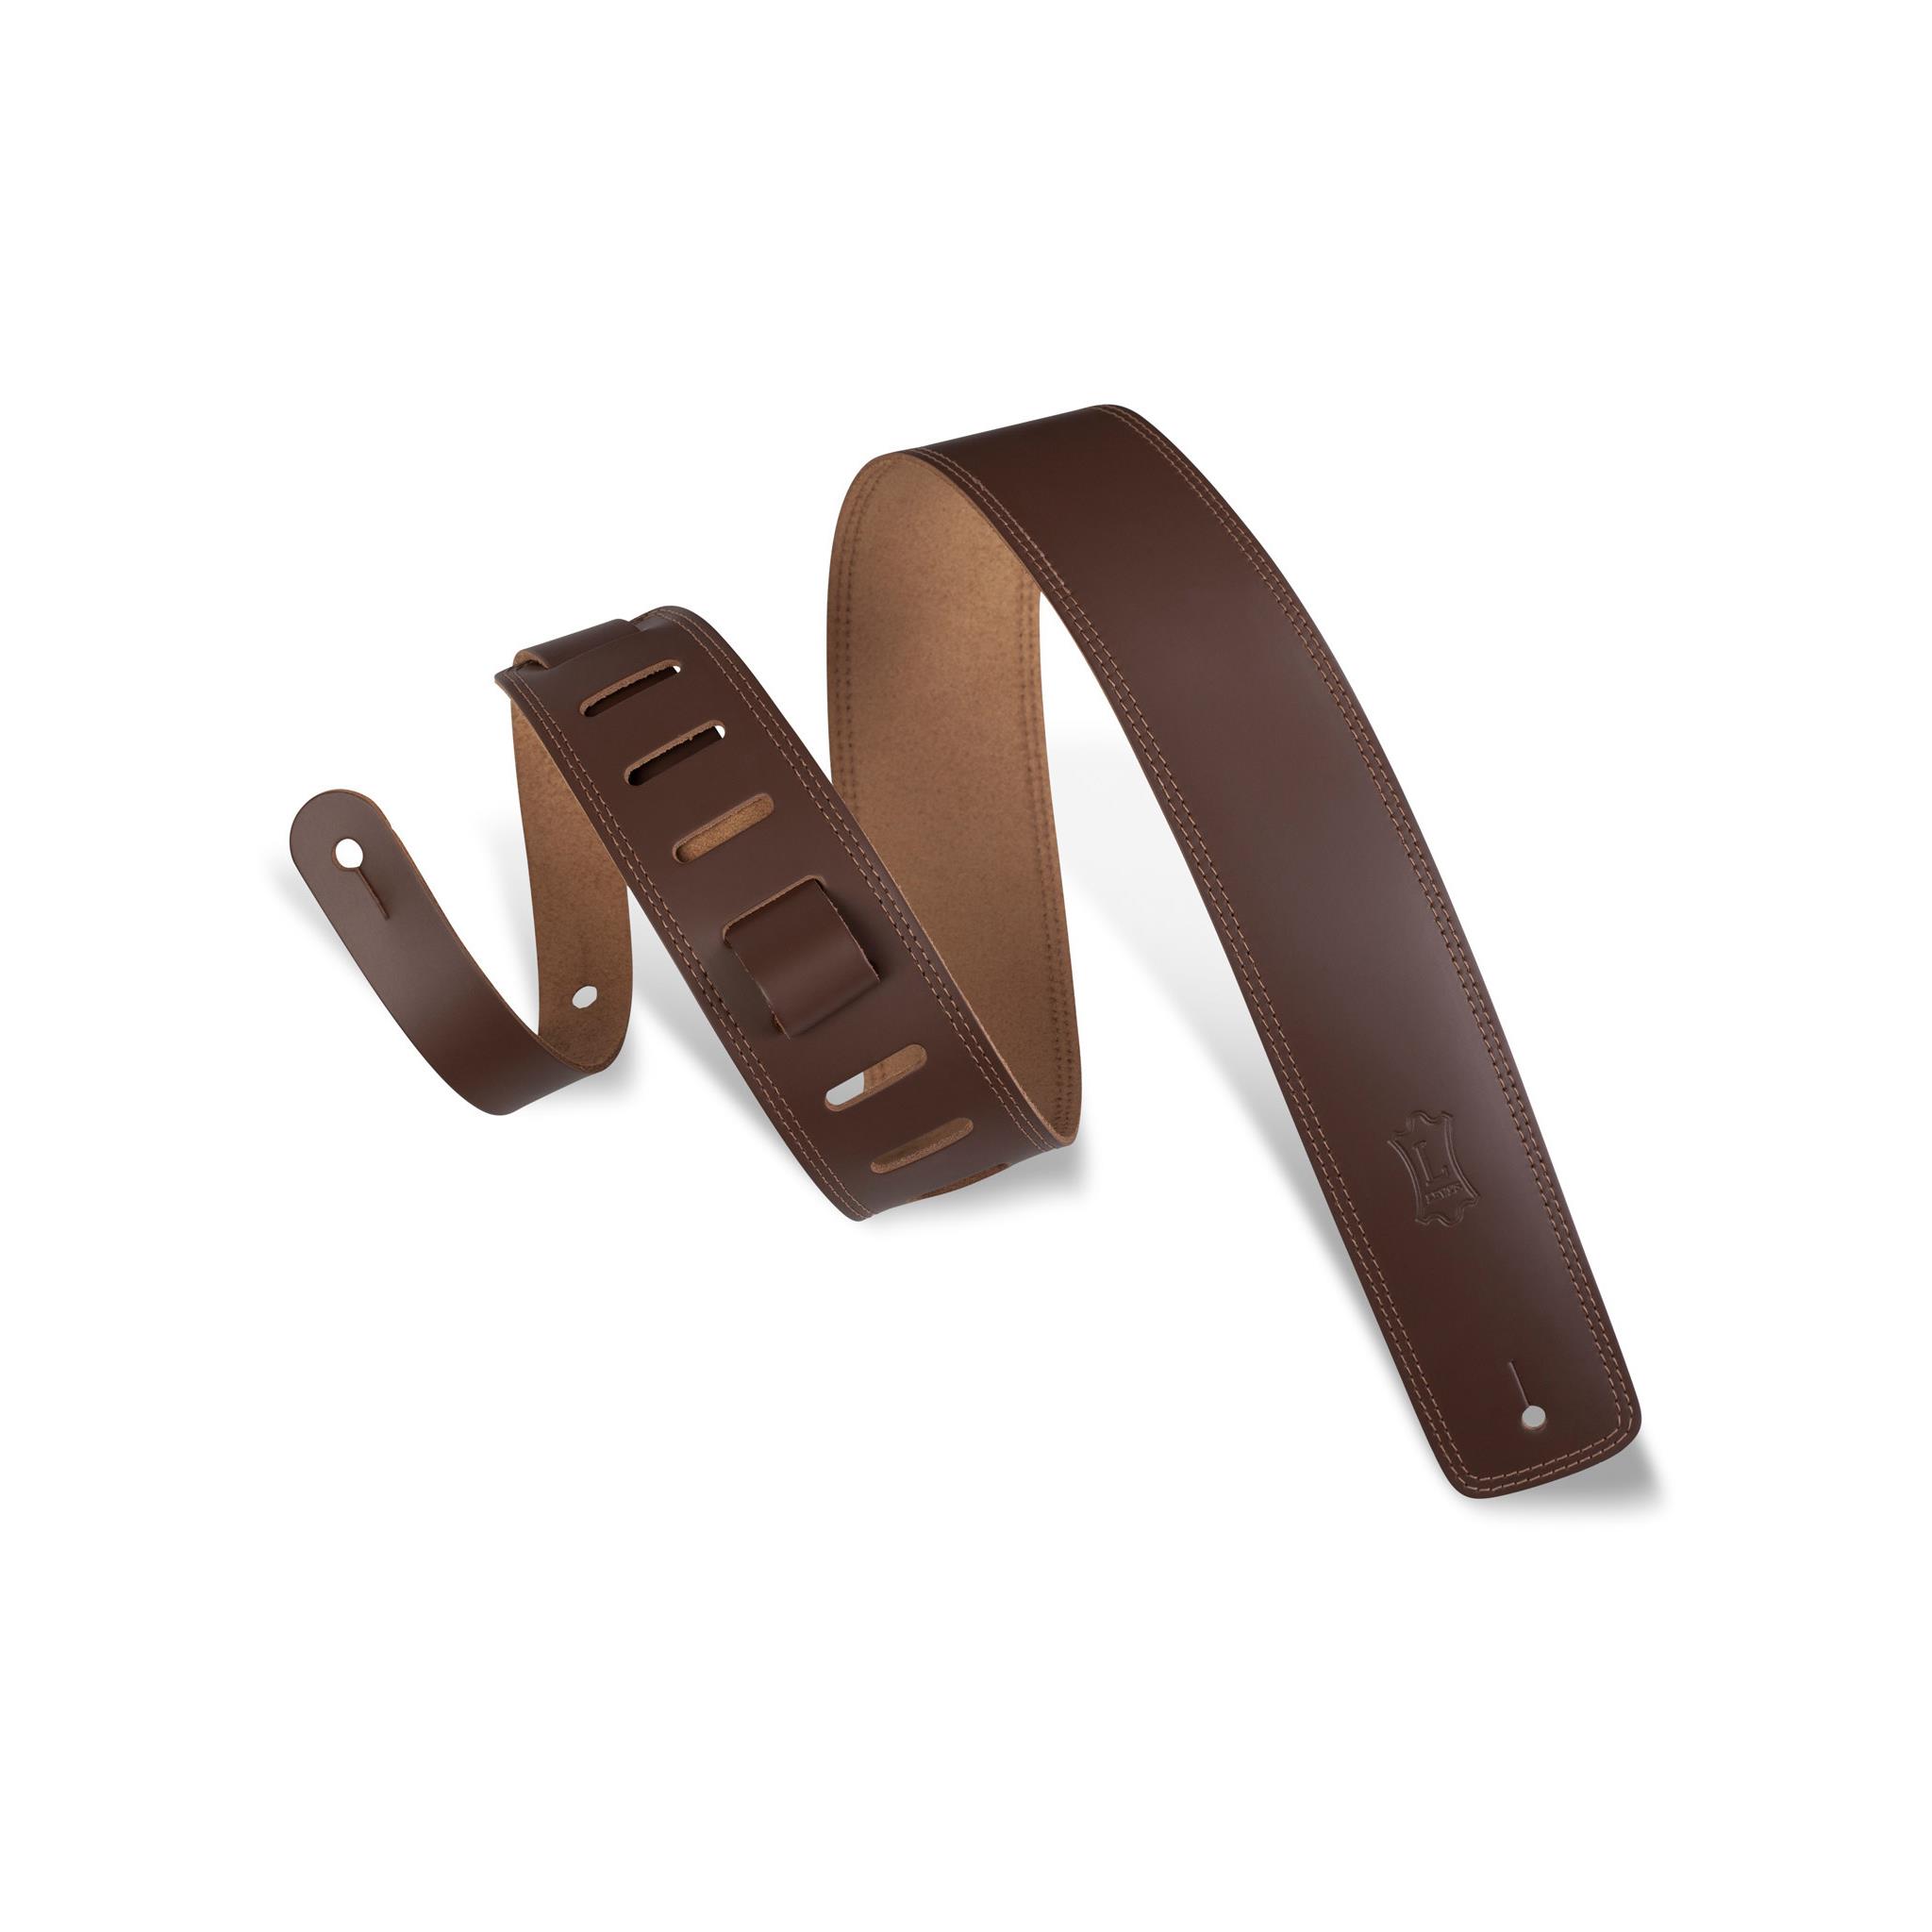 LEVY'S 2 1/2" Wide Brown Genuine Leather Guitar Strap.